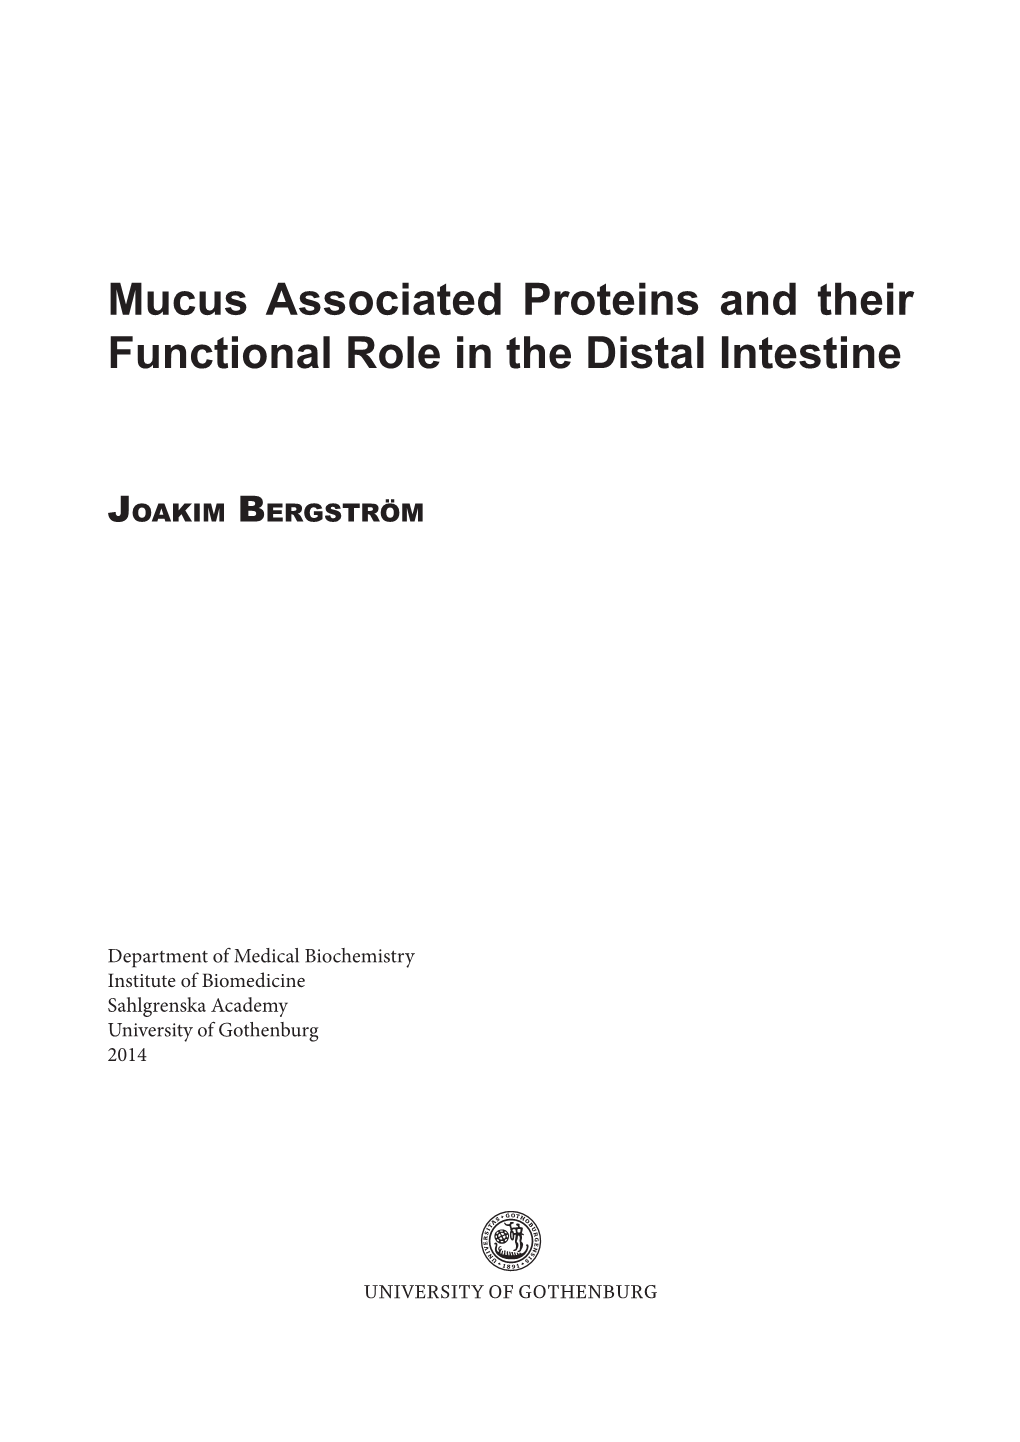 Mucus Associated Proteins and Their Functional Role in the Distal Intestine